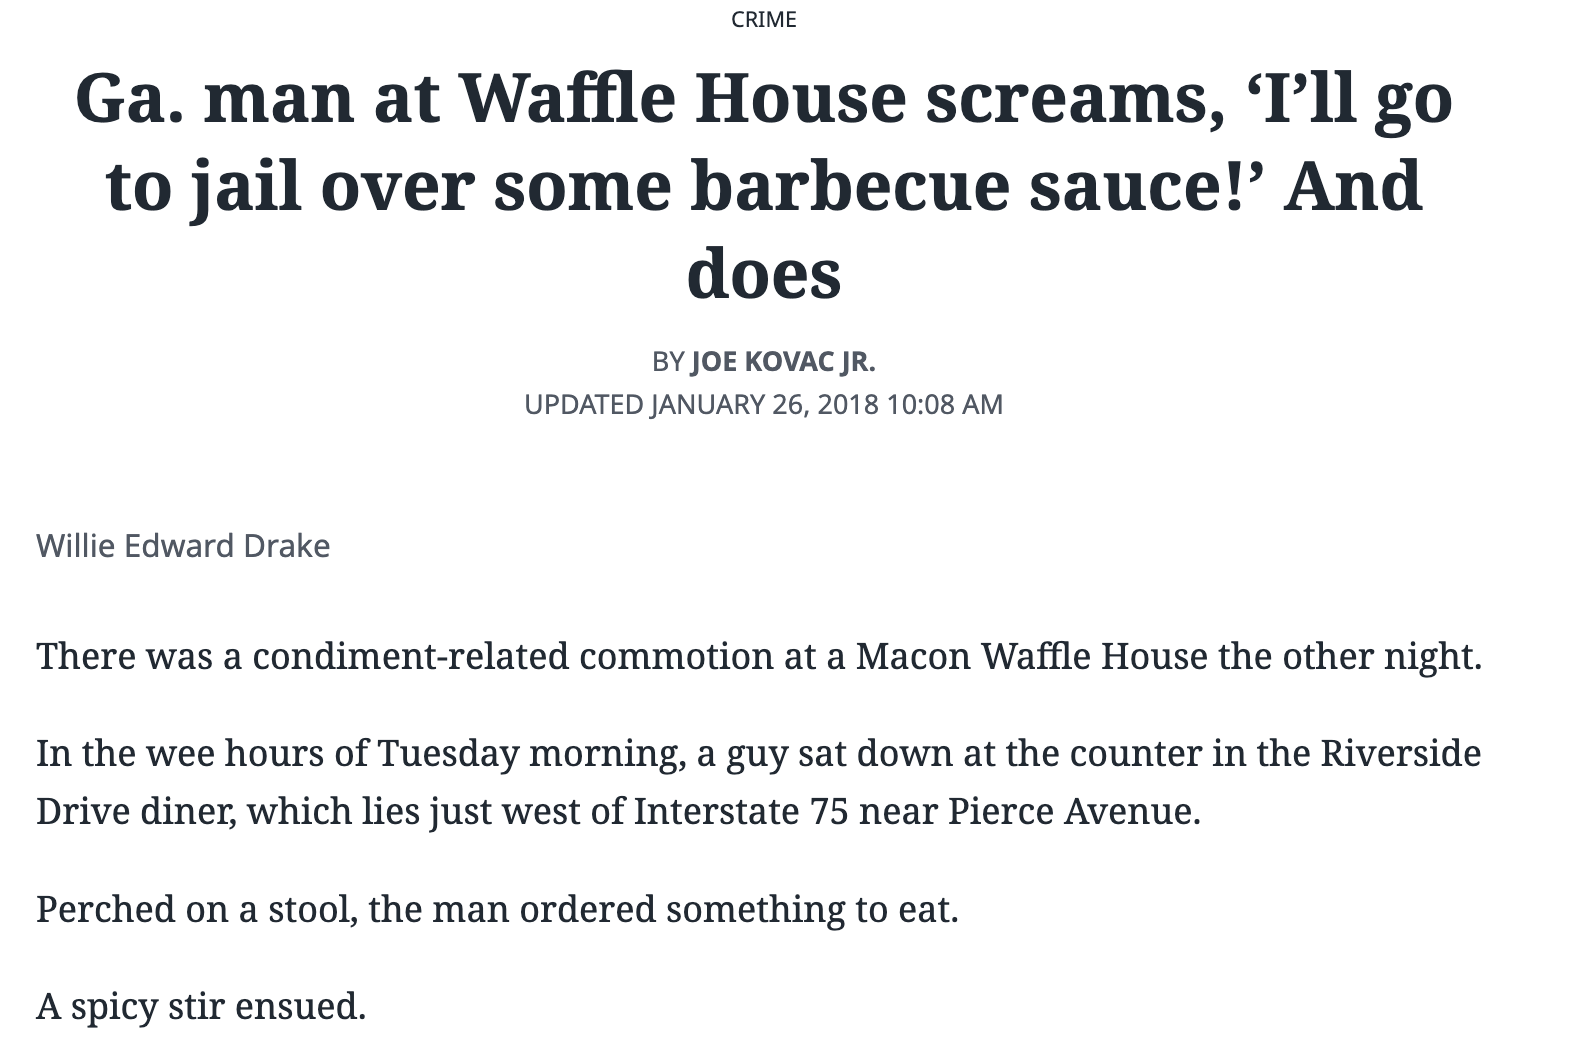 document - Crime Ga. man at Waffle House screams, 'I'll go to jail over some barbecue sauce!' And does By Joe Kovac Jr. Updated Willie Edward Drake There was a condimentrelated commotion at a Macon Waffle House the other night. In the wee hours of Tuesday